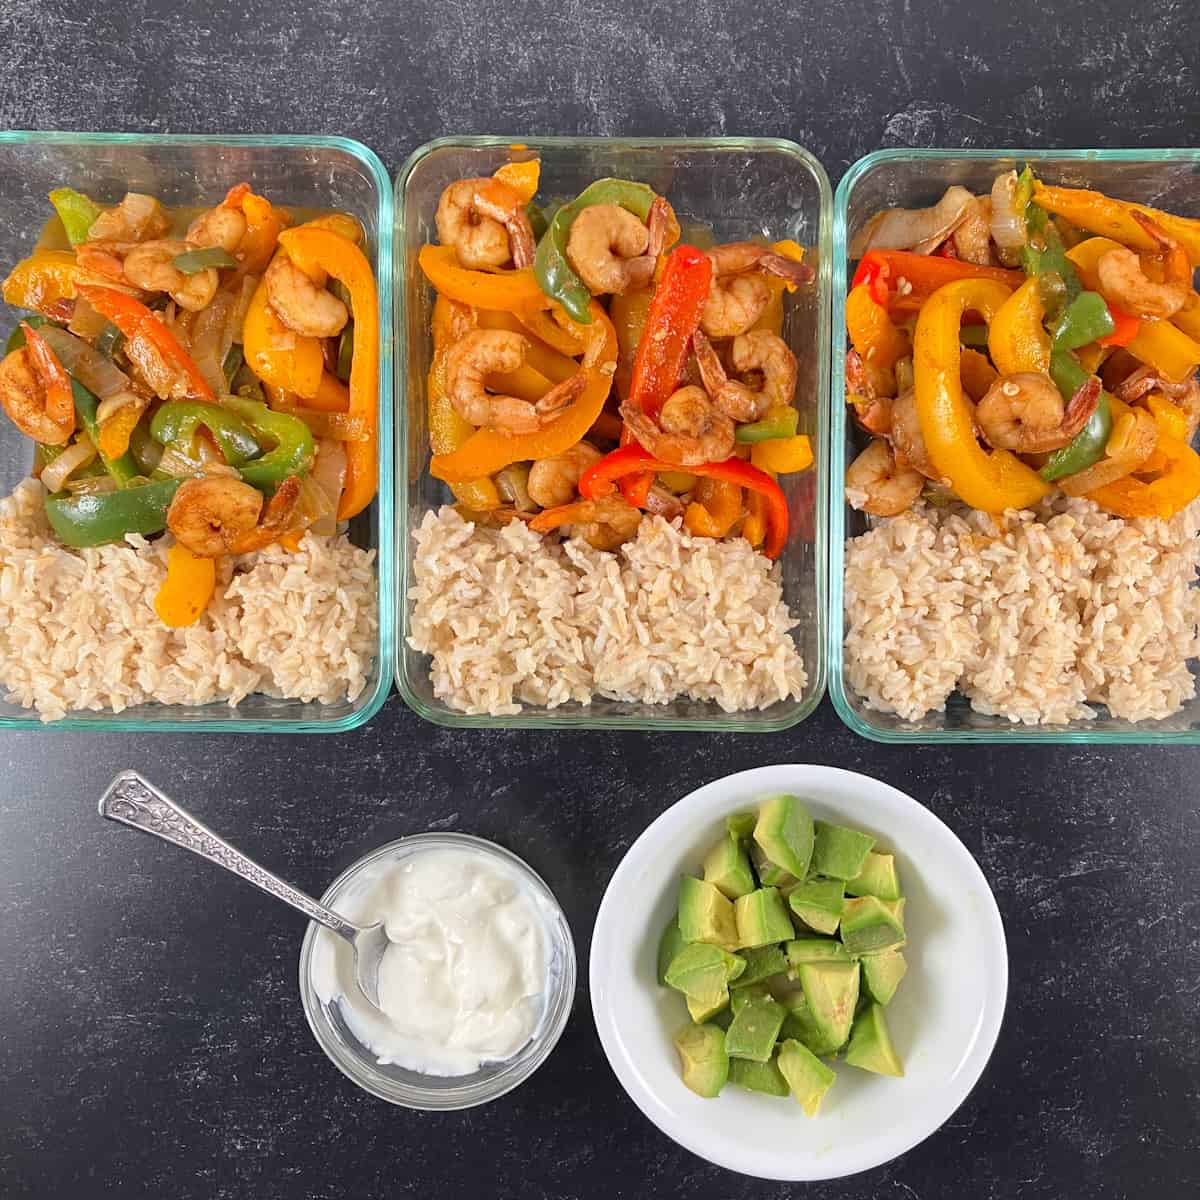 Top 10 Meal Prep Recipes To Lose Weight - PrepYoSelf